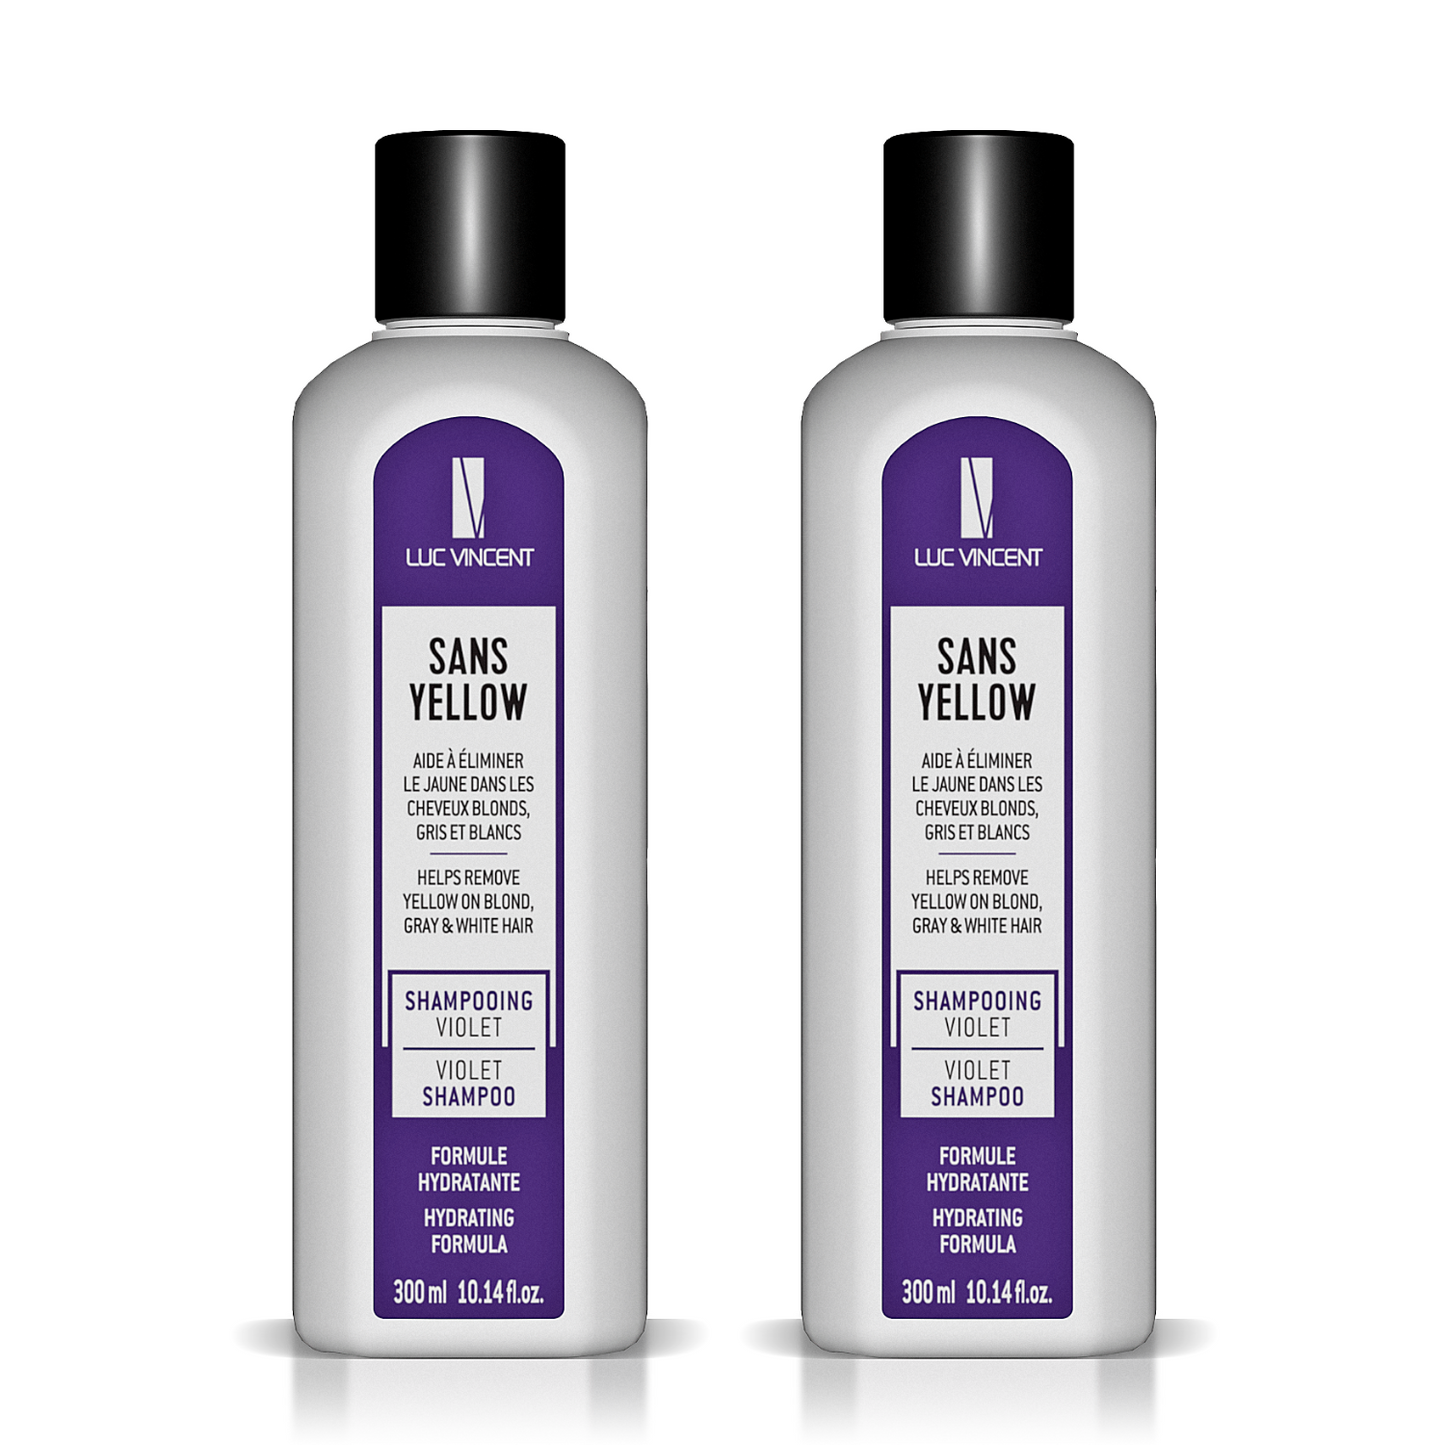 2 "SANS YELLOW" Shampoo - Special Offer